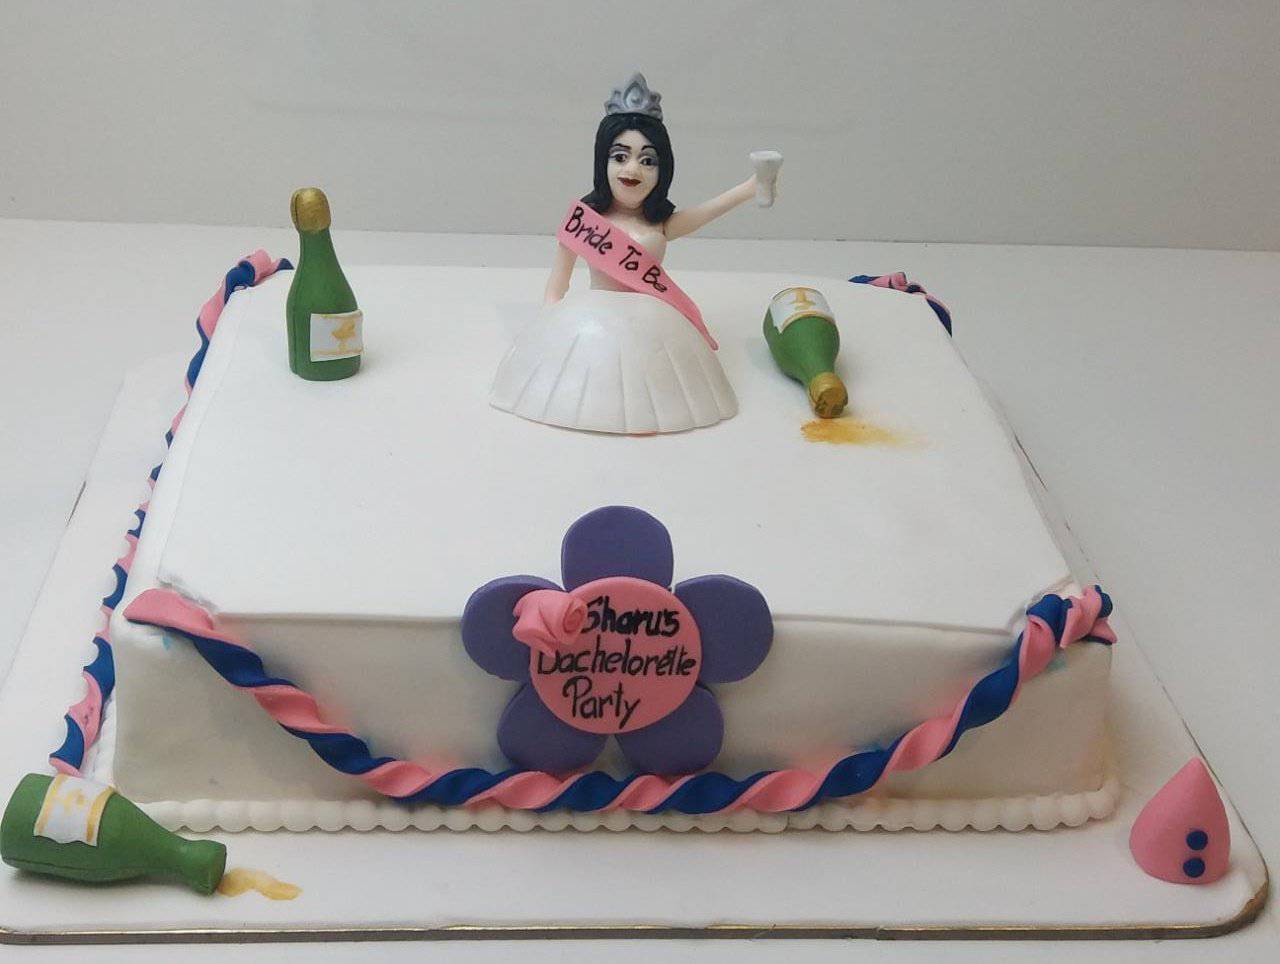 A cake for a 'bride to be' | Bachelorette cake, Brides cake, Bachelor party  cakes